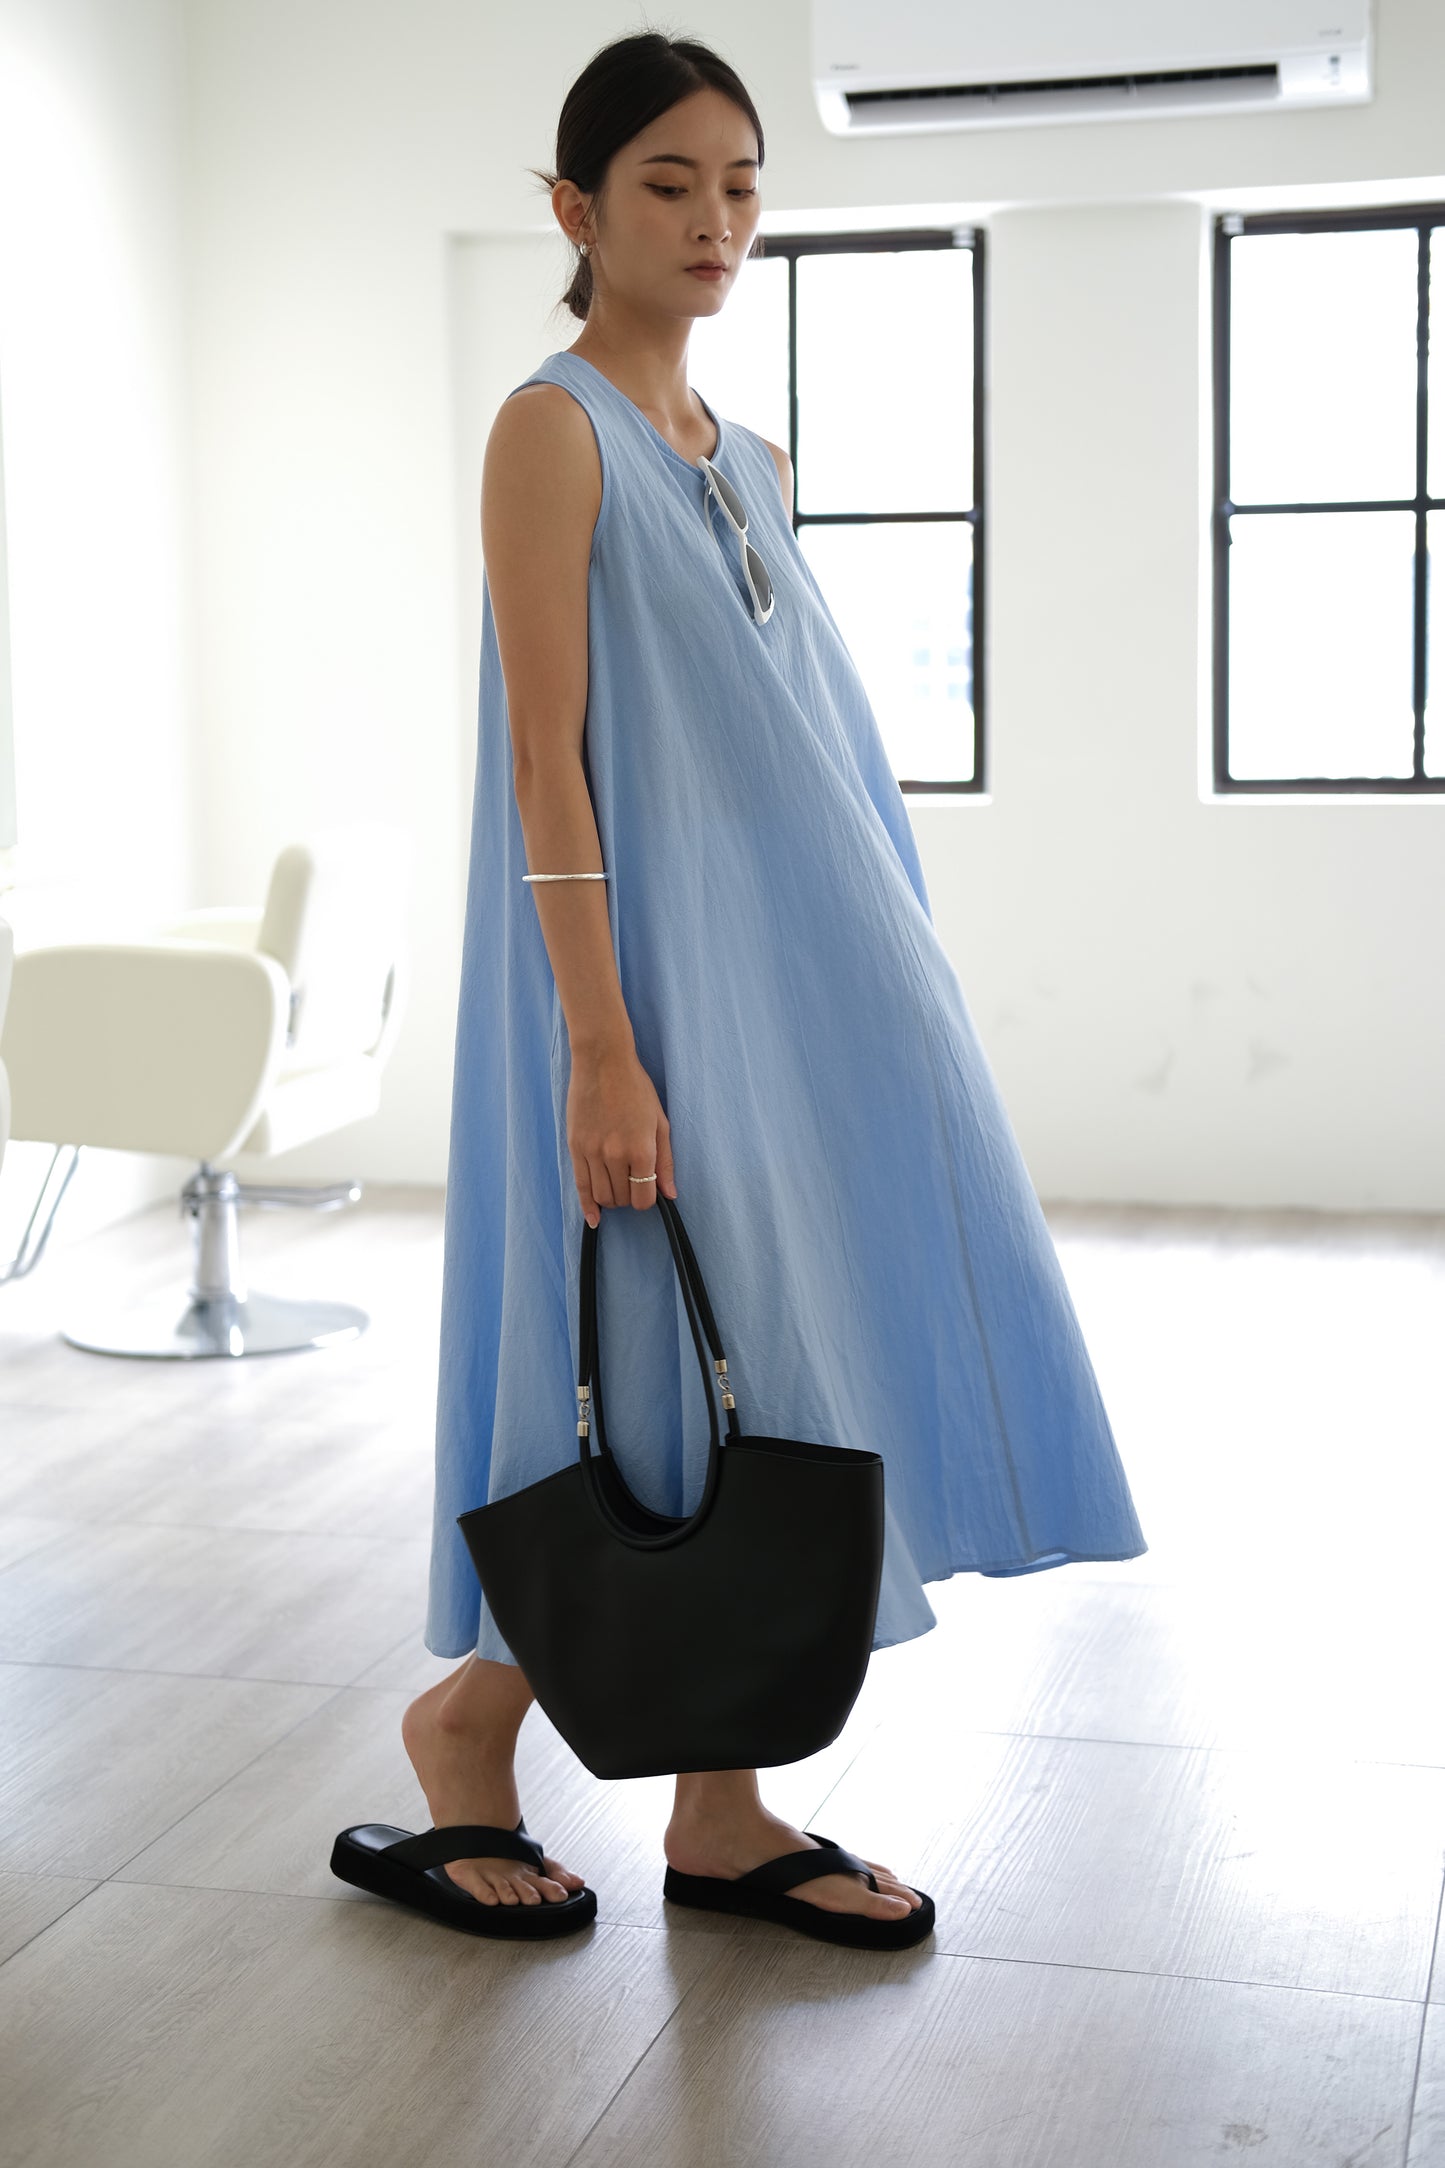 Sleeveless cotton and linen dress in baby blue